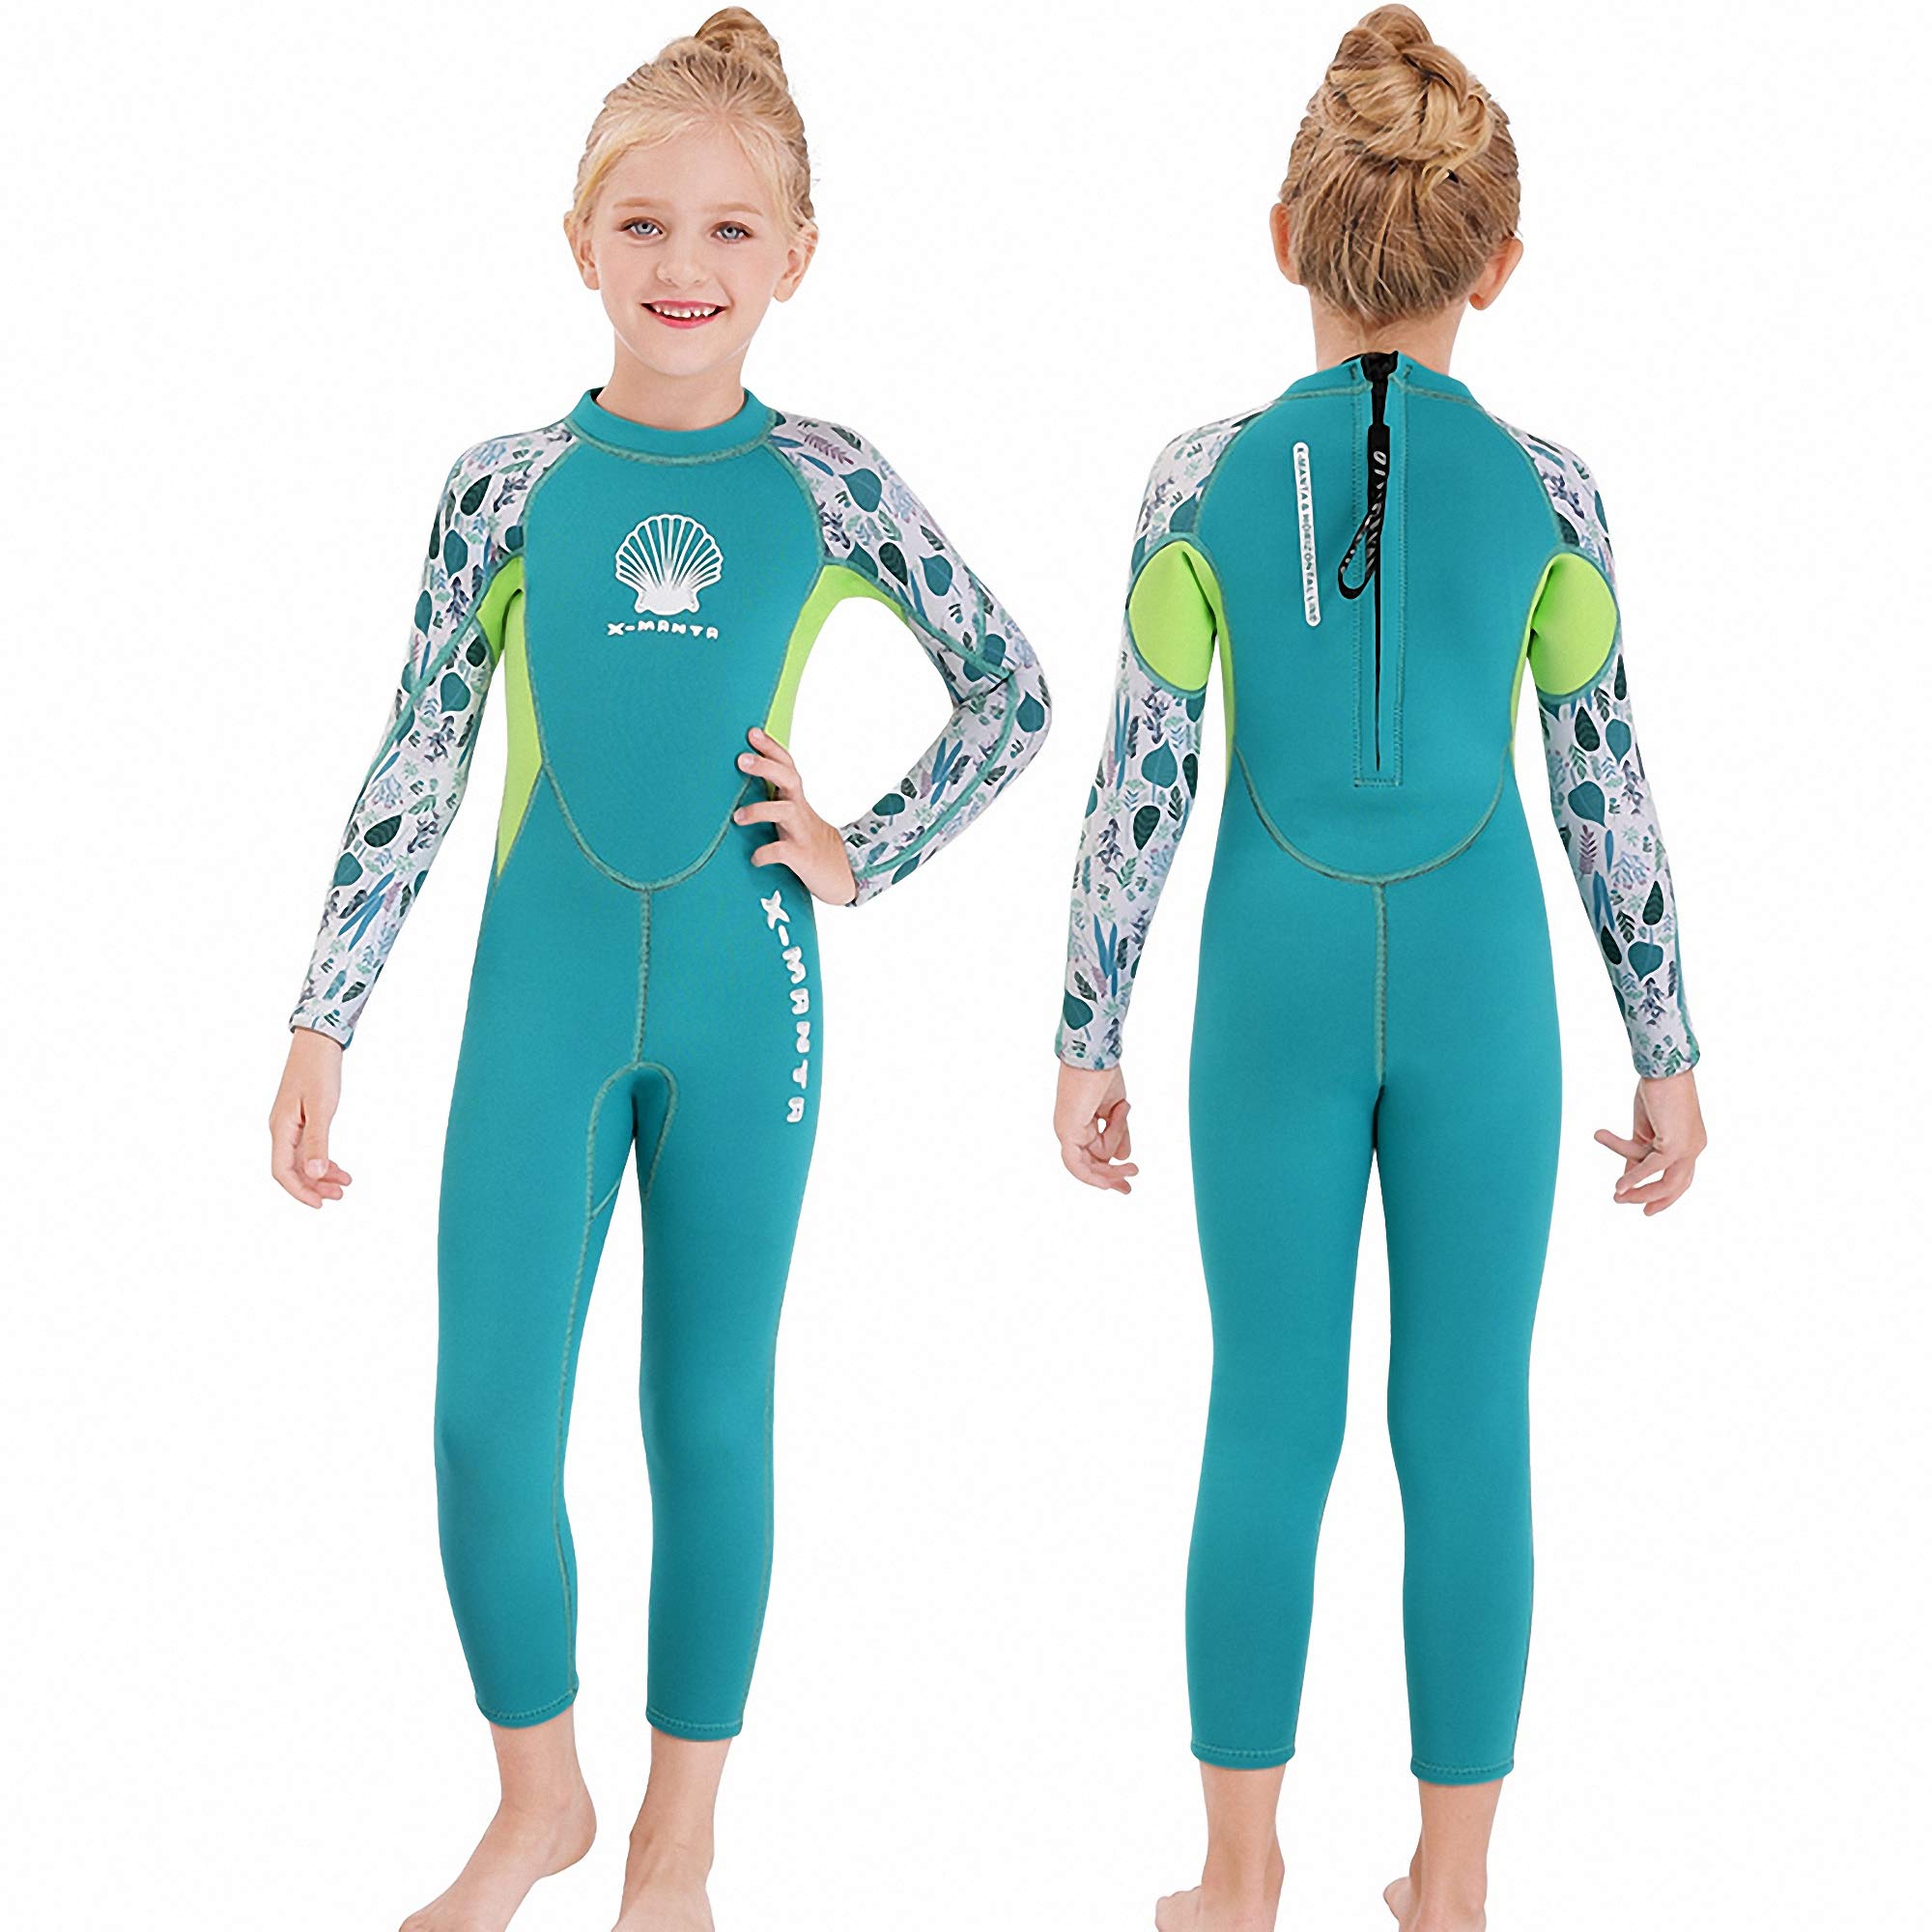 MWTA Wetsuit for Kids Boys Girls 2.5mm Neoprene Thermal Swimsuit Fullsuit Wet Suits Long Sleeve for Toddler Child Junior Youth Swimming, Diving, Surfing Aqua-XL